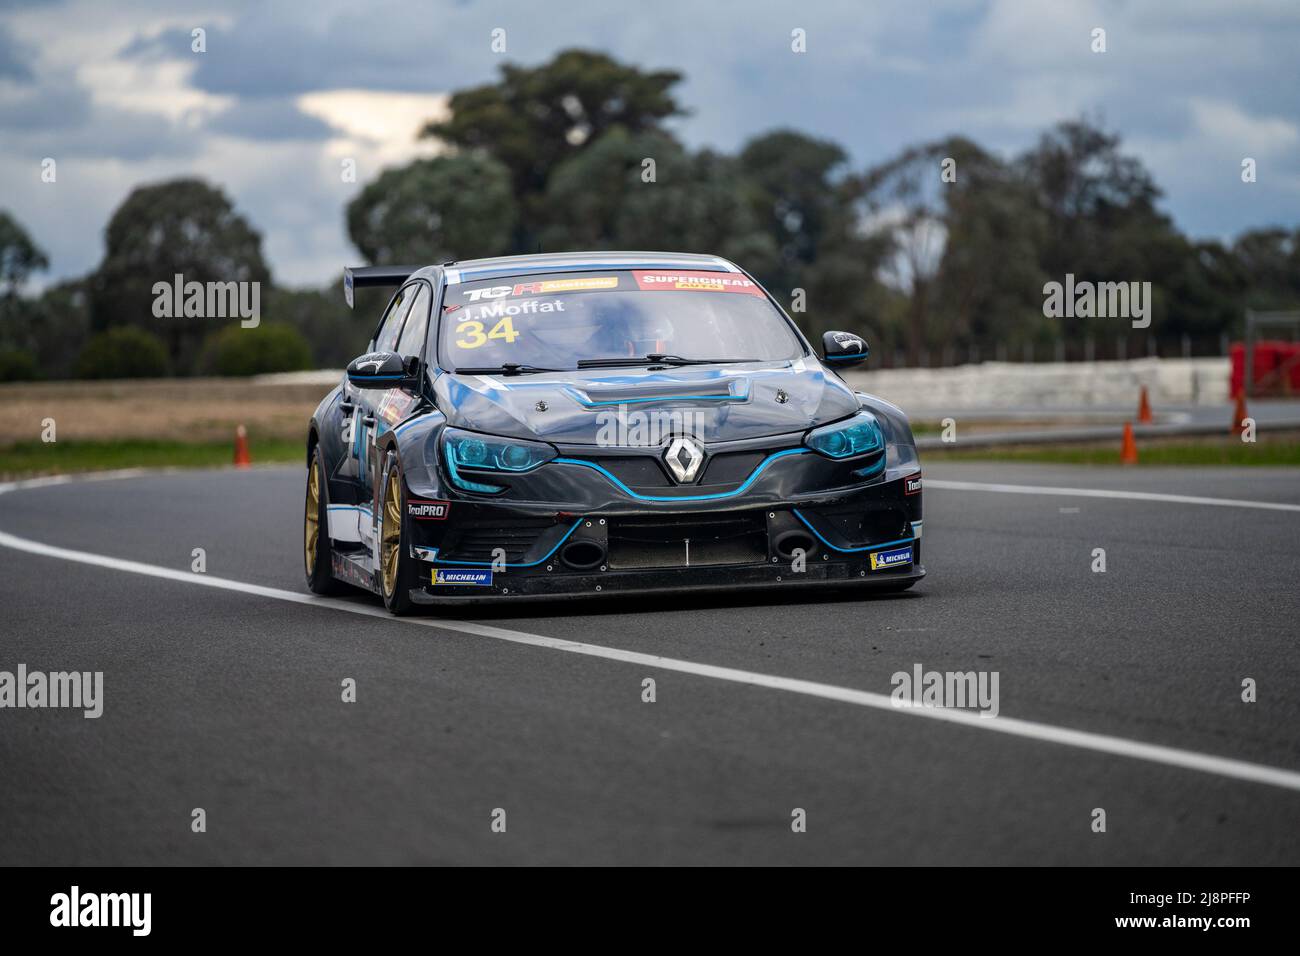 James Moffat (#34) brings his TCR Australia race car back into pitlane during a private test day at Winton Motor Raceway Stock Photo